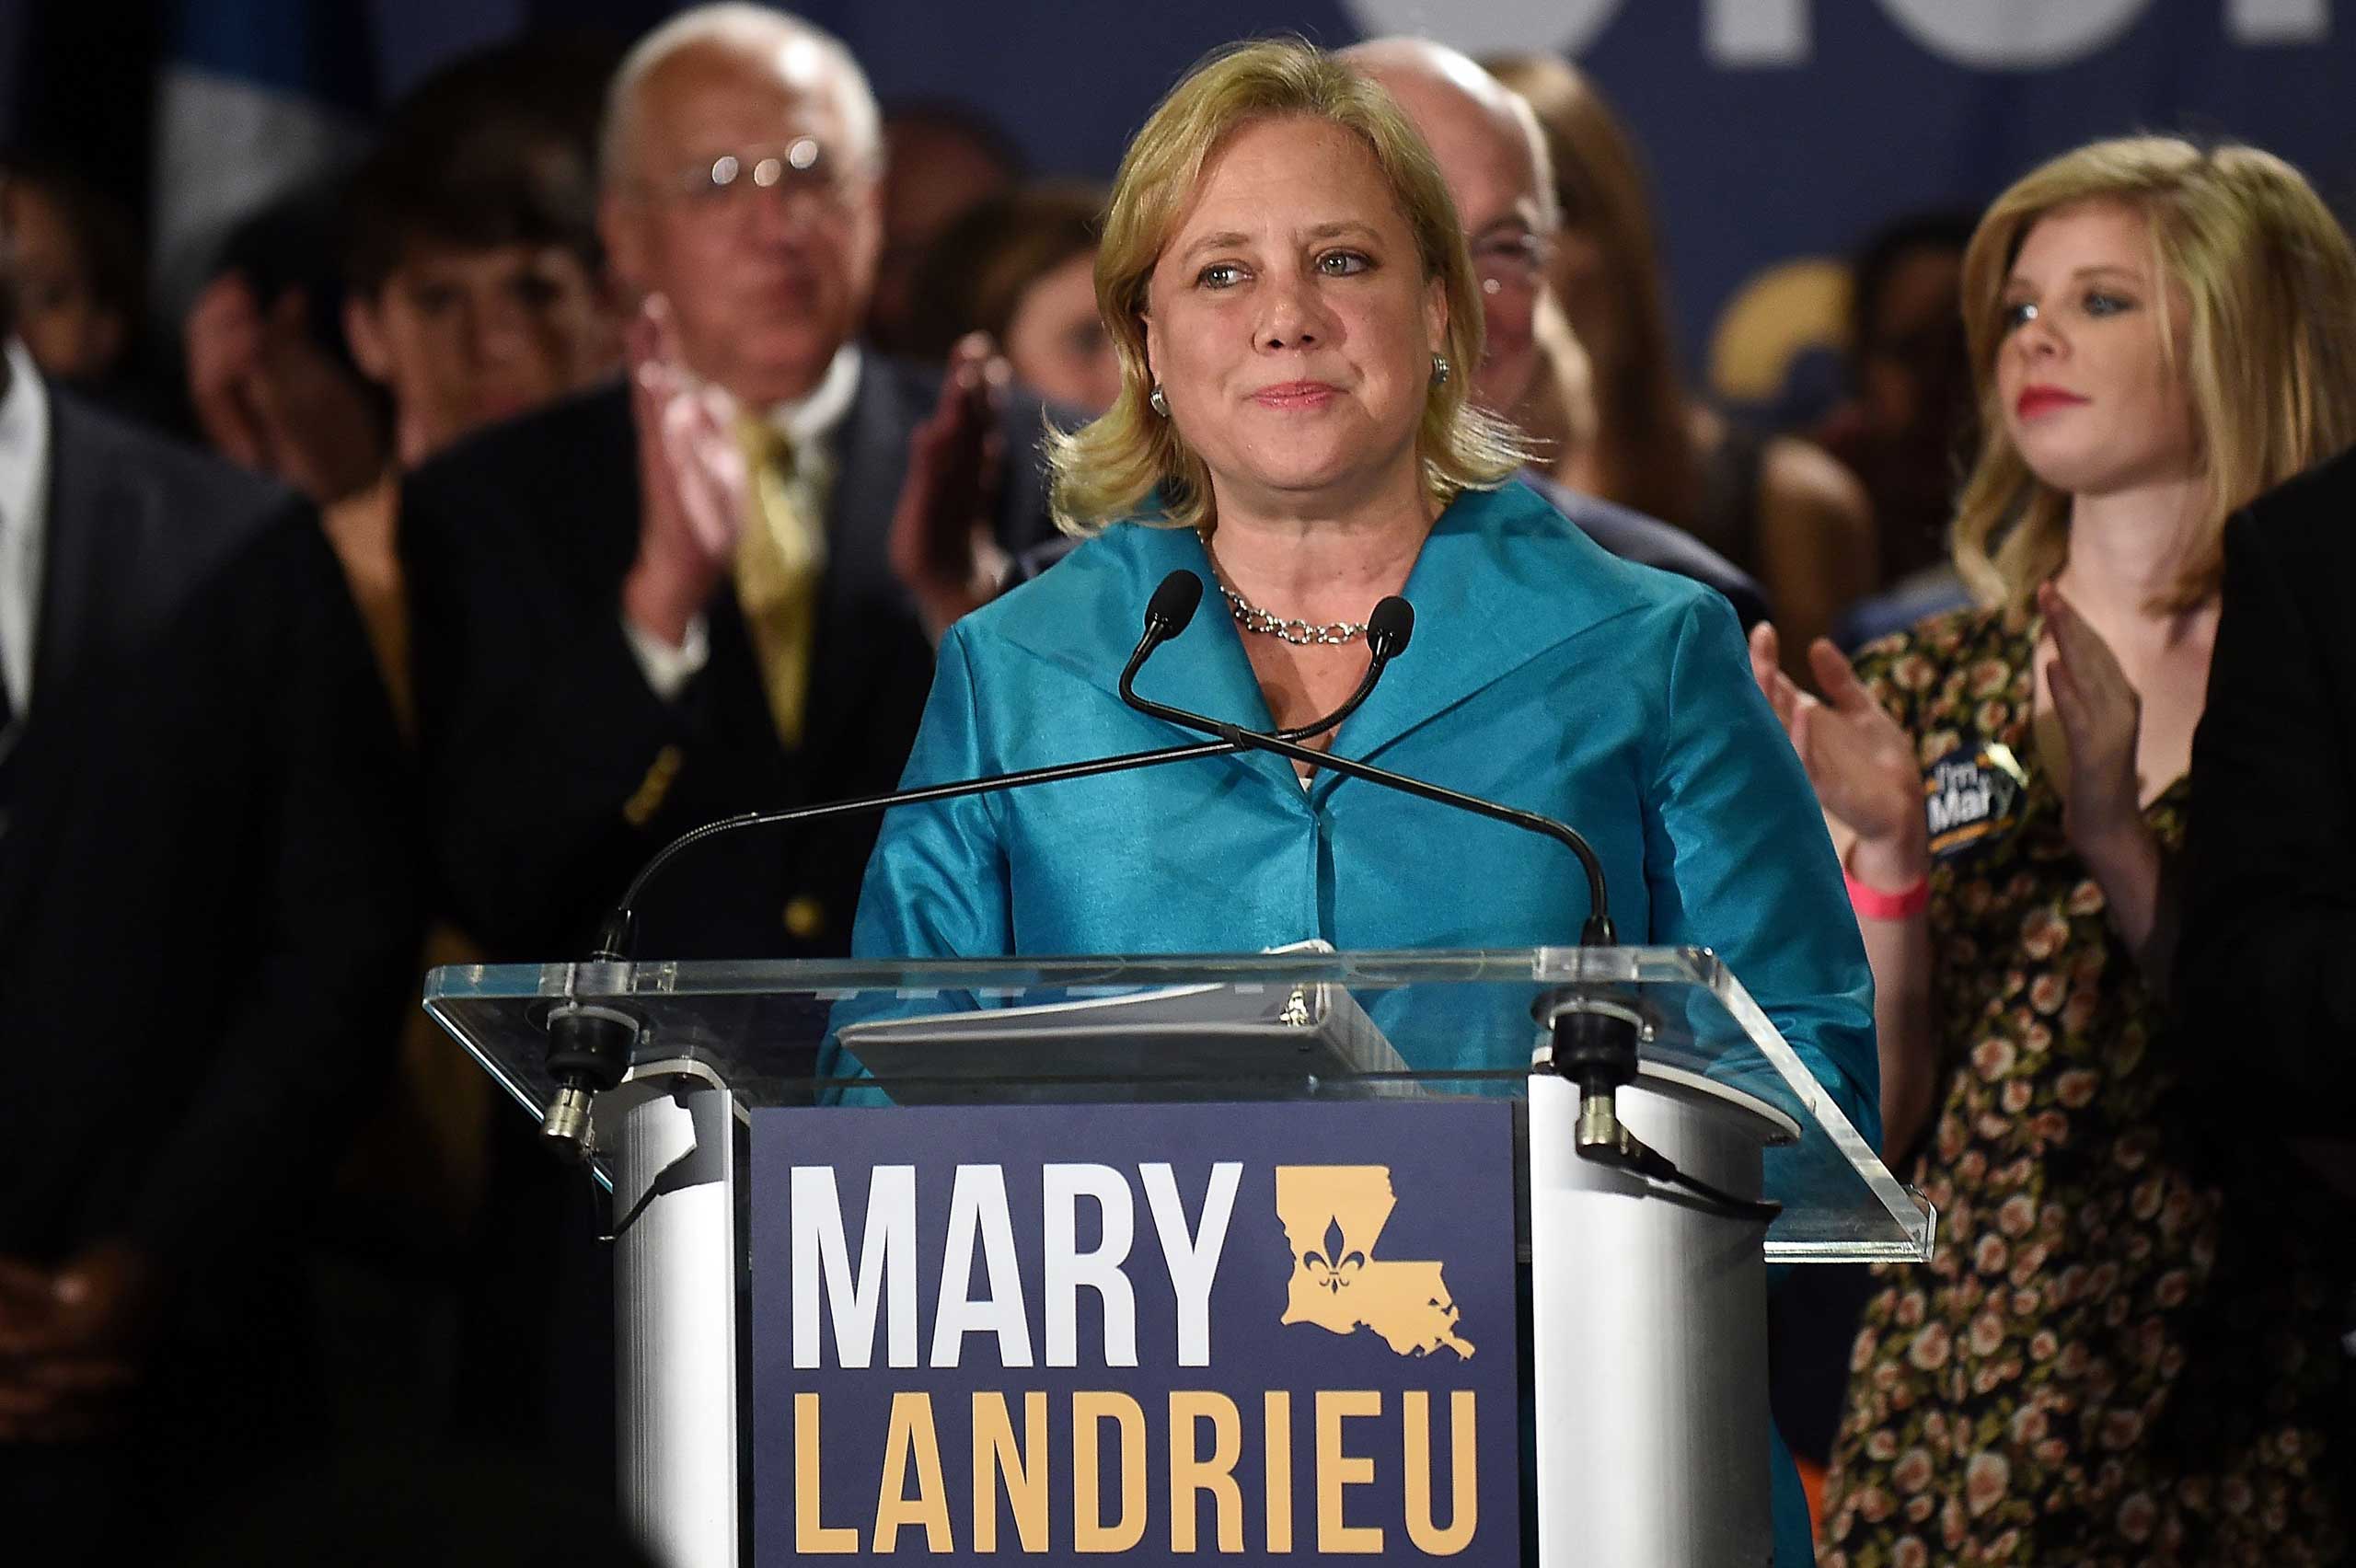 U.S. Sen. Mary Landrieu (D-LA) gathers with supporters during midterm elections at the Hyatt Regency in New Orleans on Nov. 4, 2014. (Stacy Revere—Getty Images)